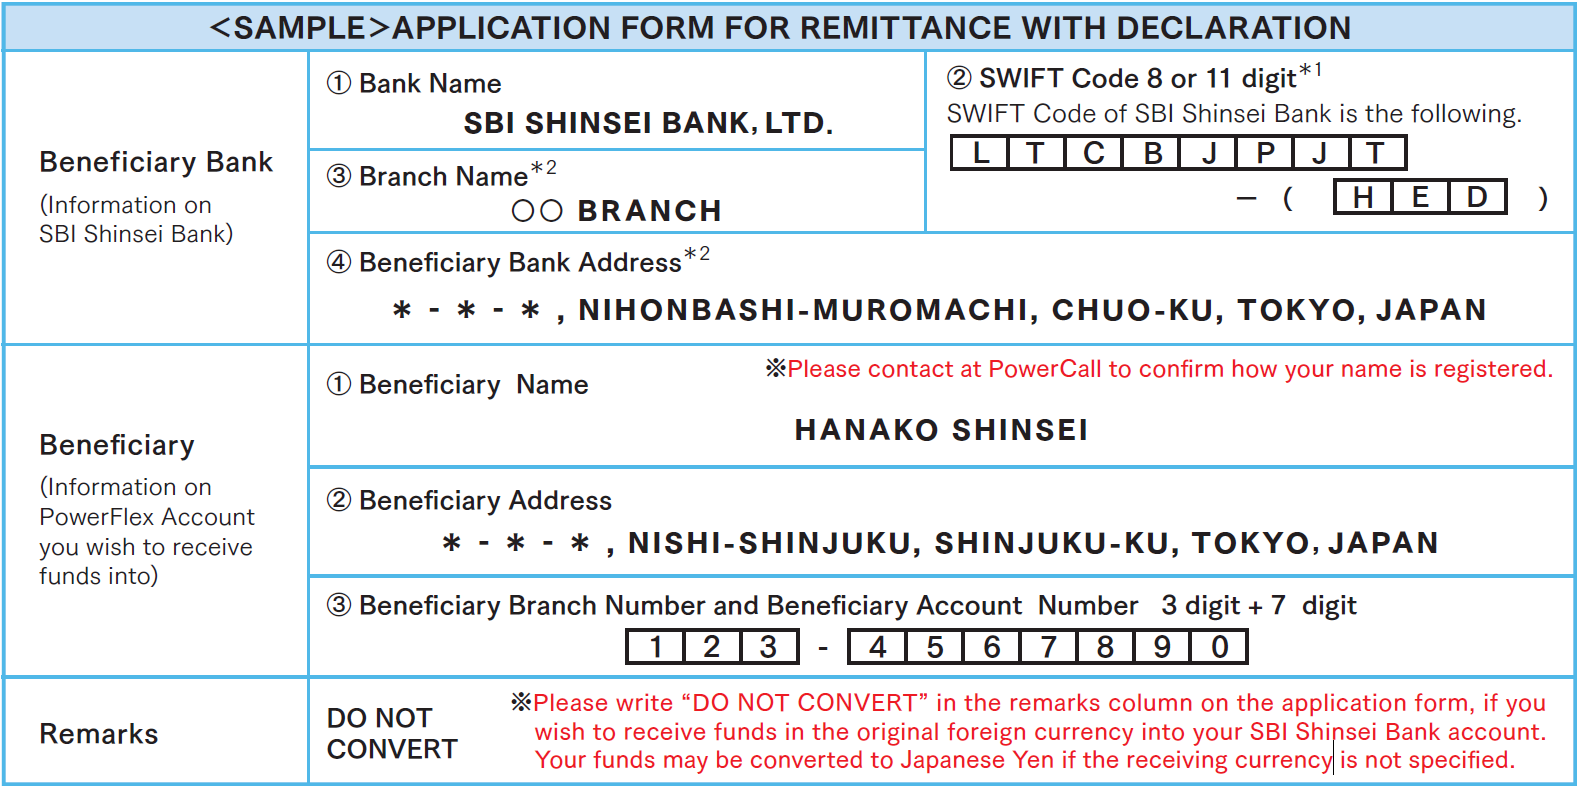 sample: APPLICATION FORM FOR REMITTANCE WITH DECLARATION